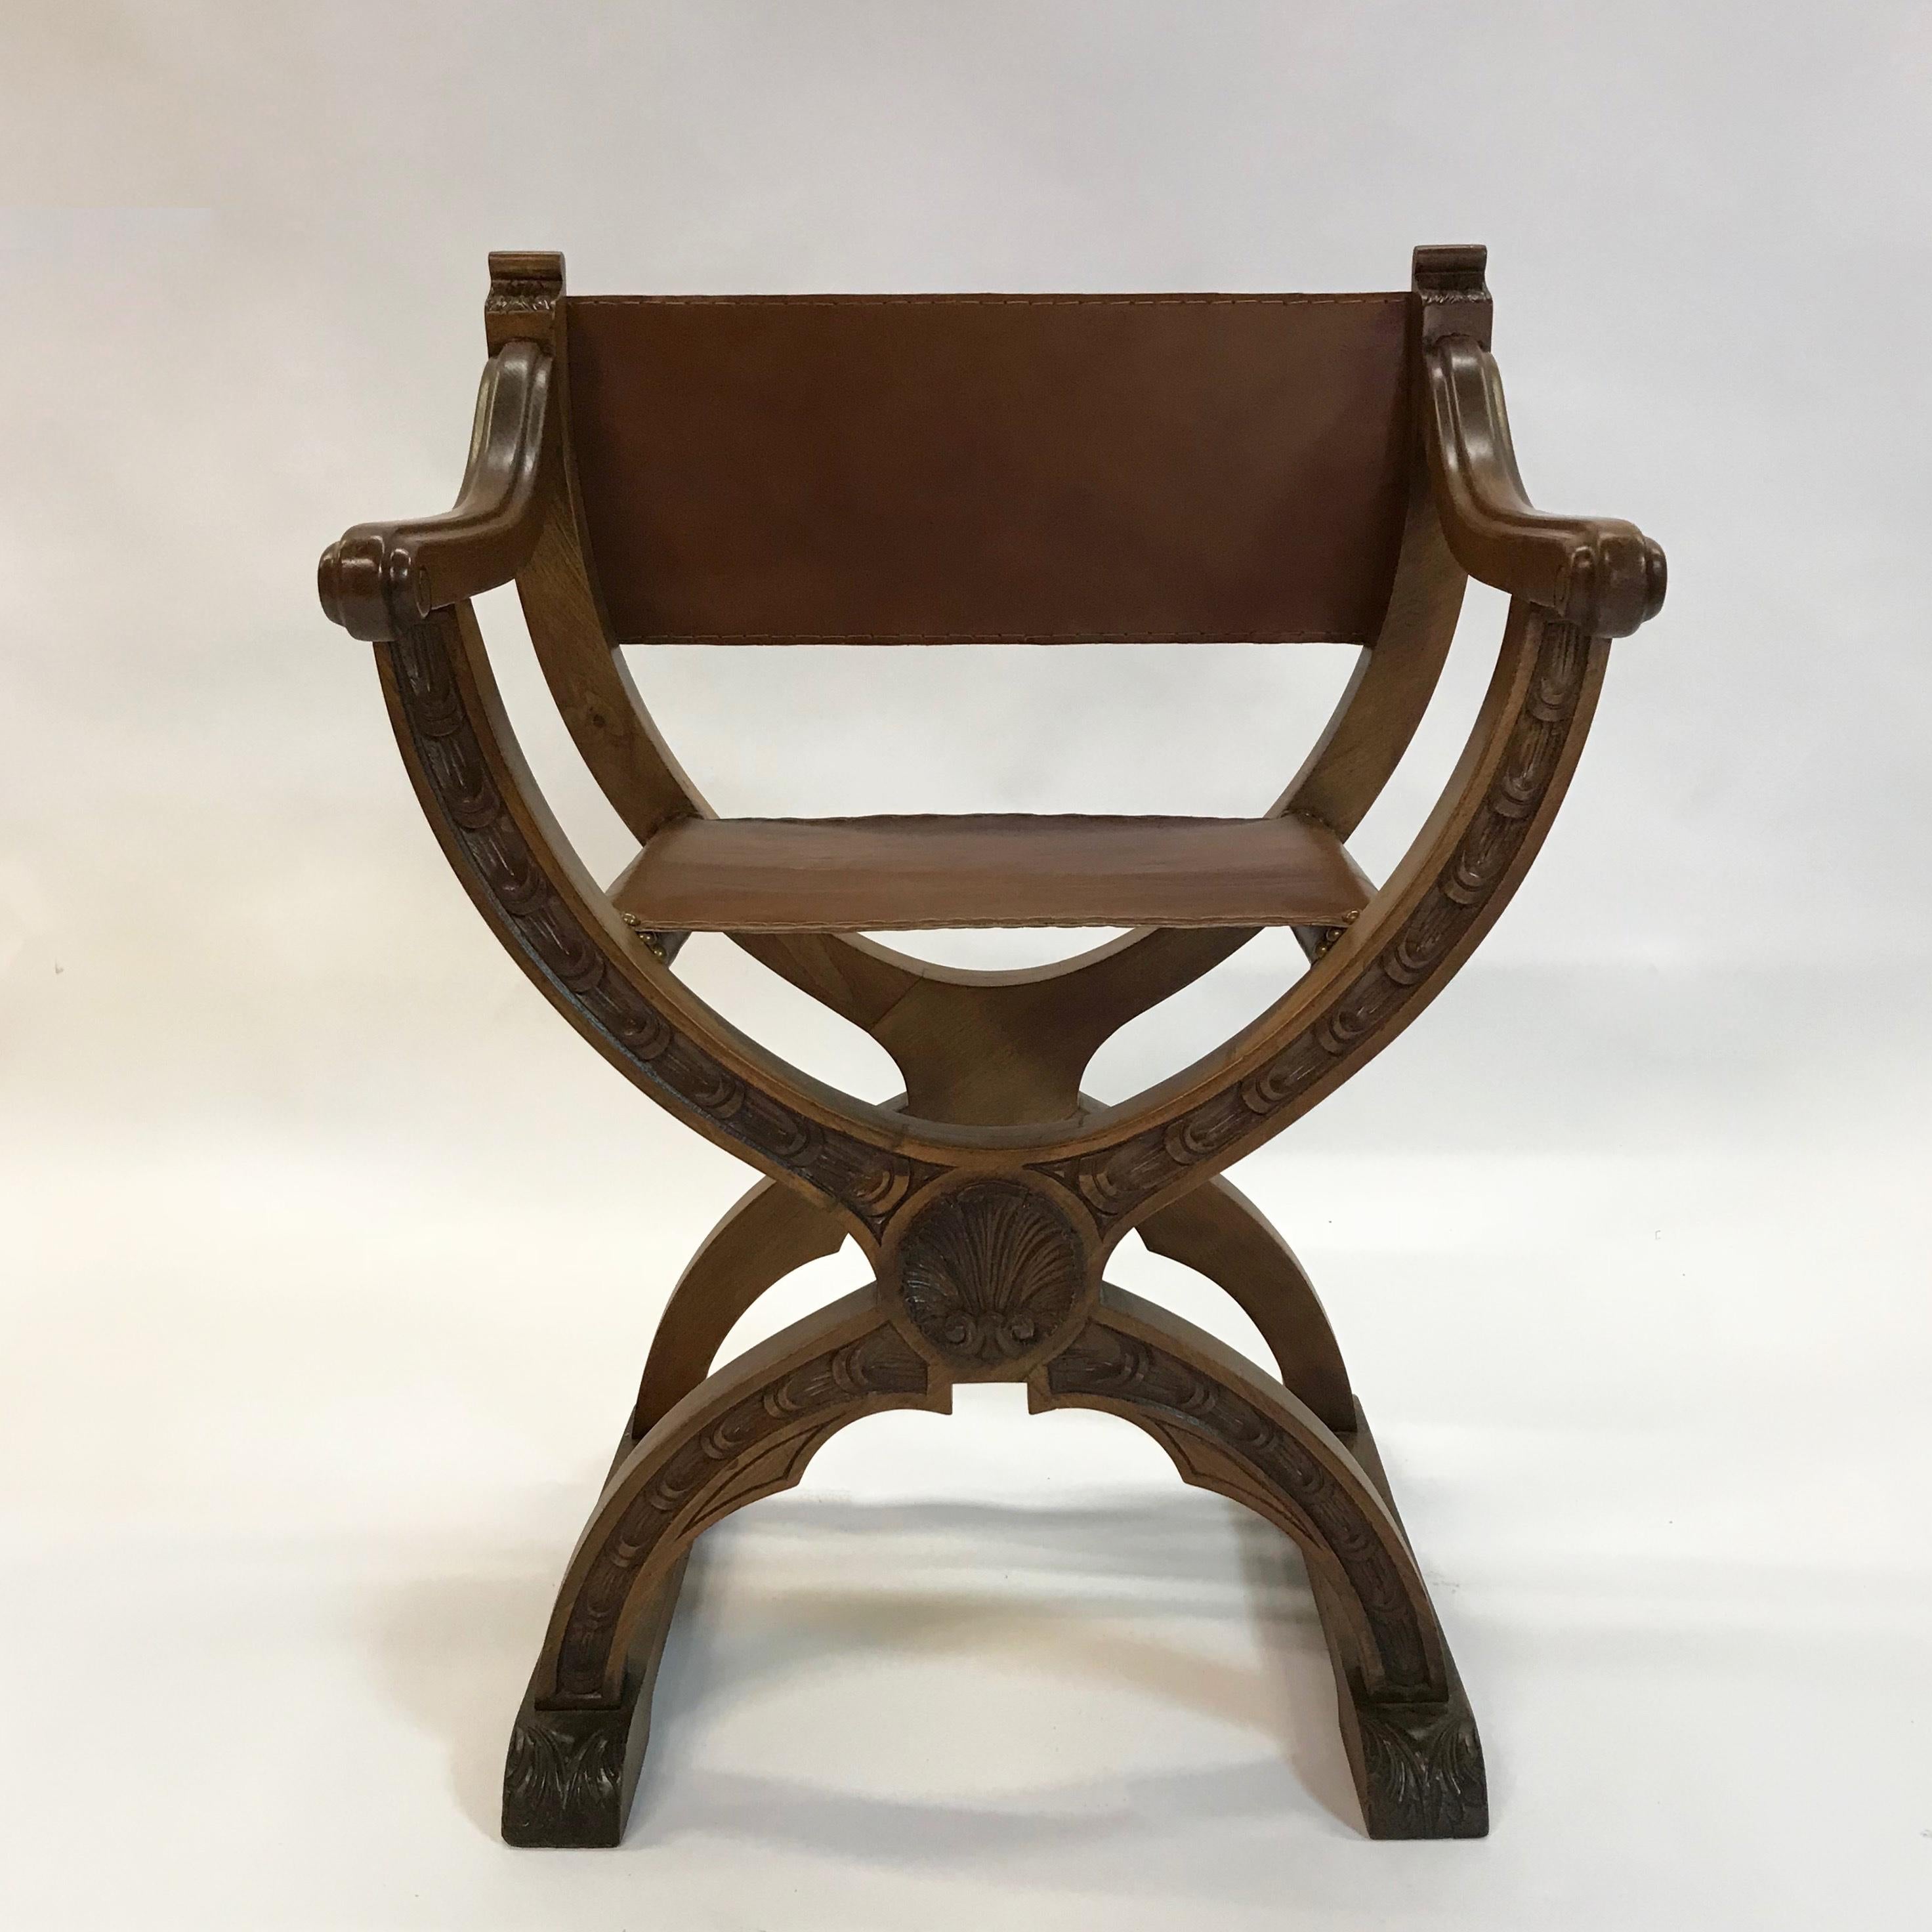 Mid-20th century, craftsman, Campaign or prayer chair features a carved cherry frame with newly upholstered luggage tan leather seat and back.